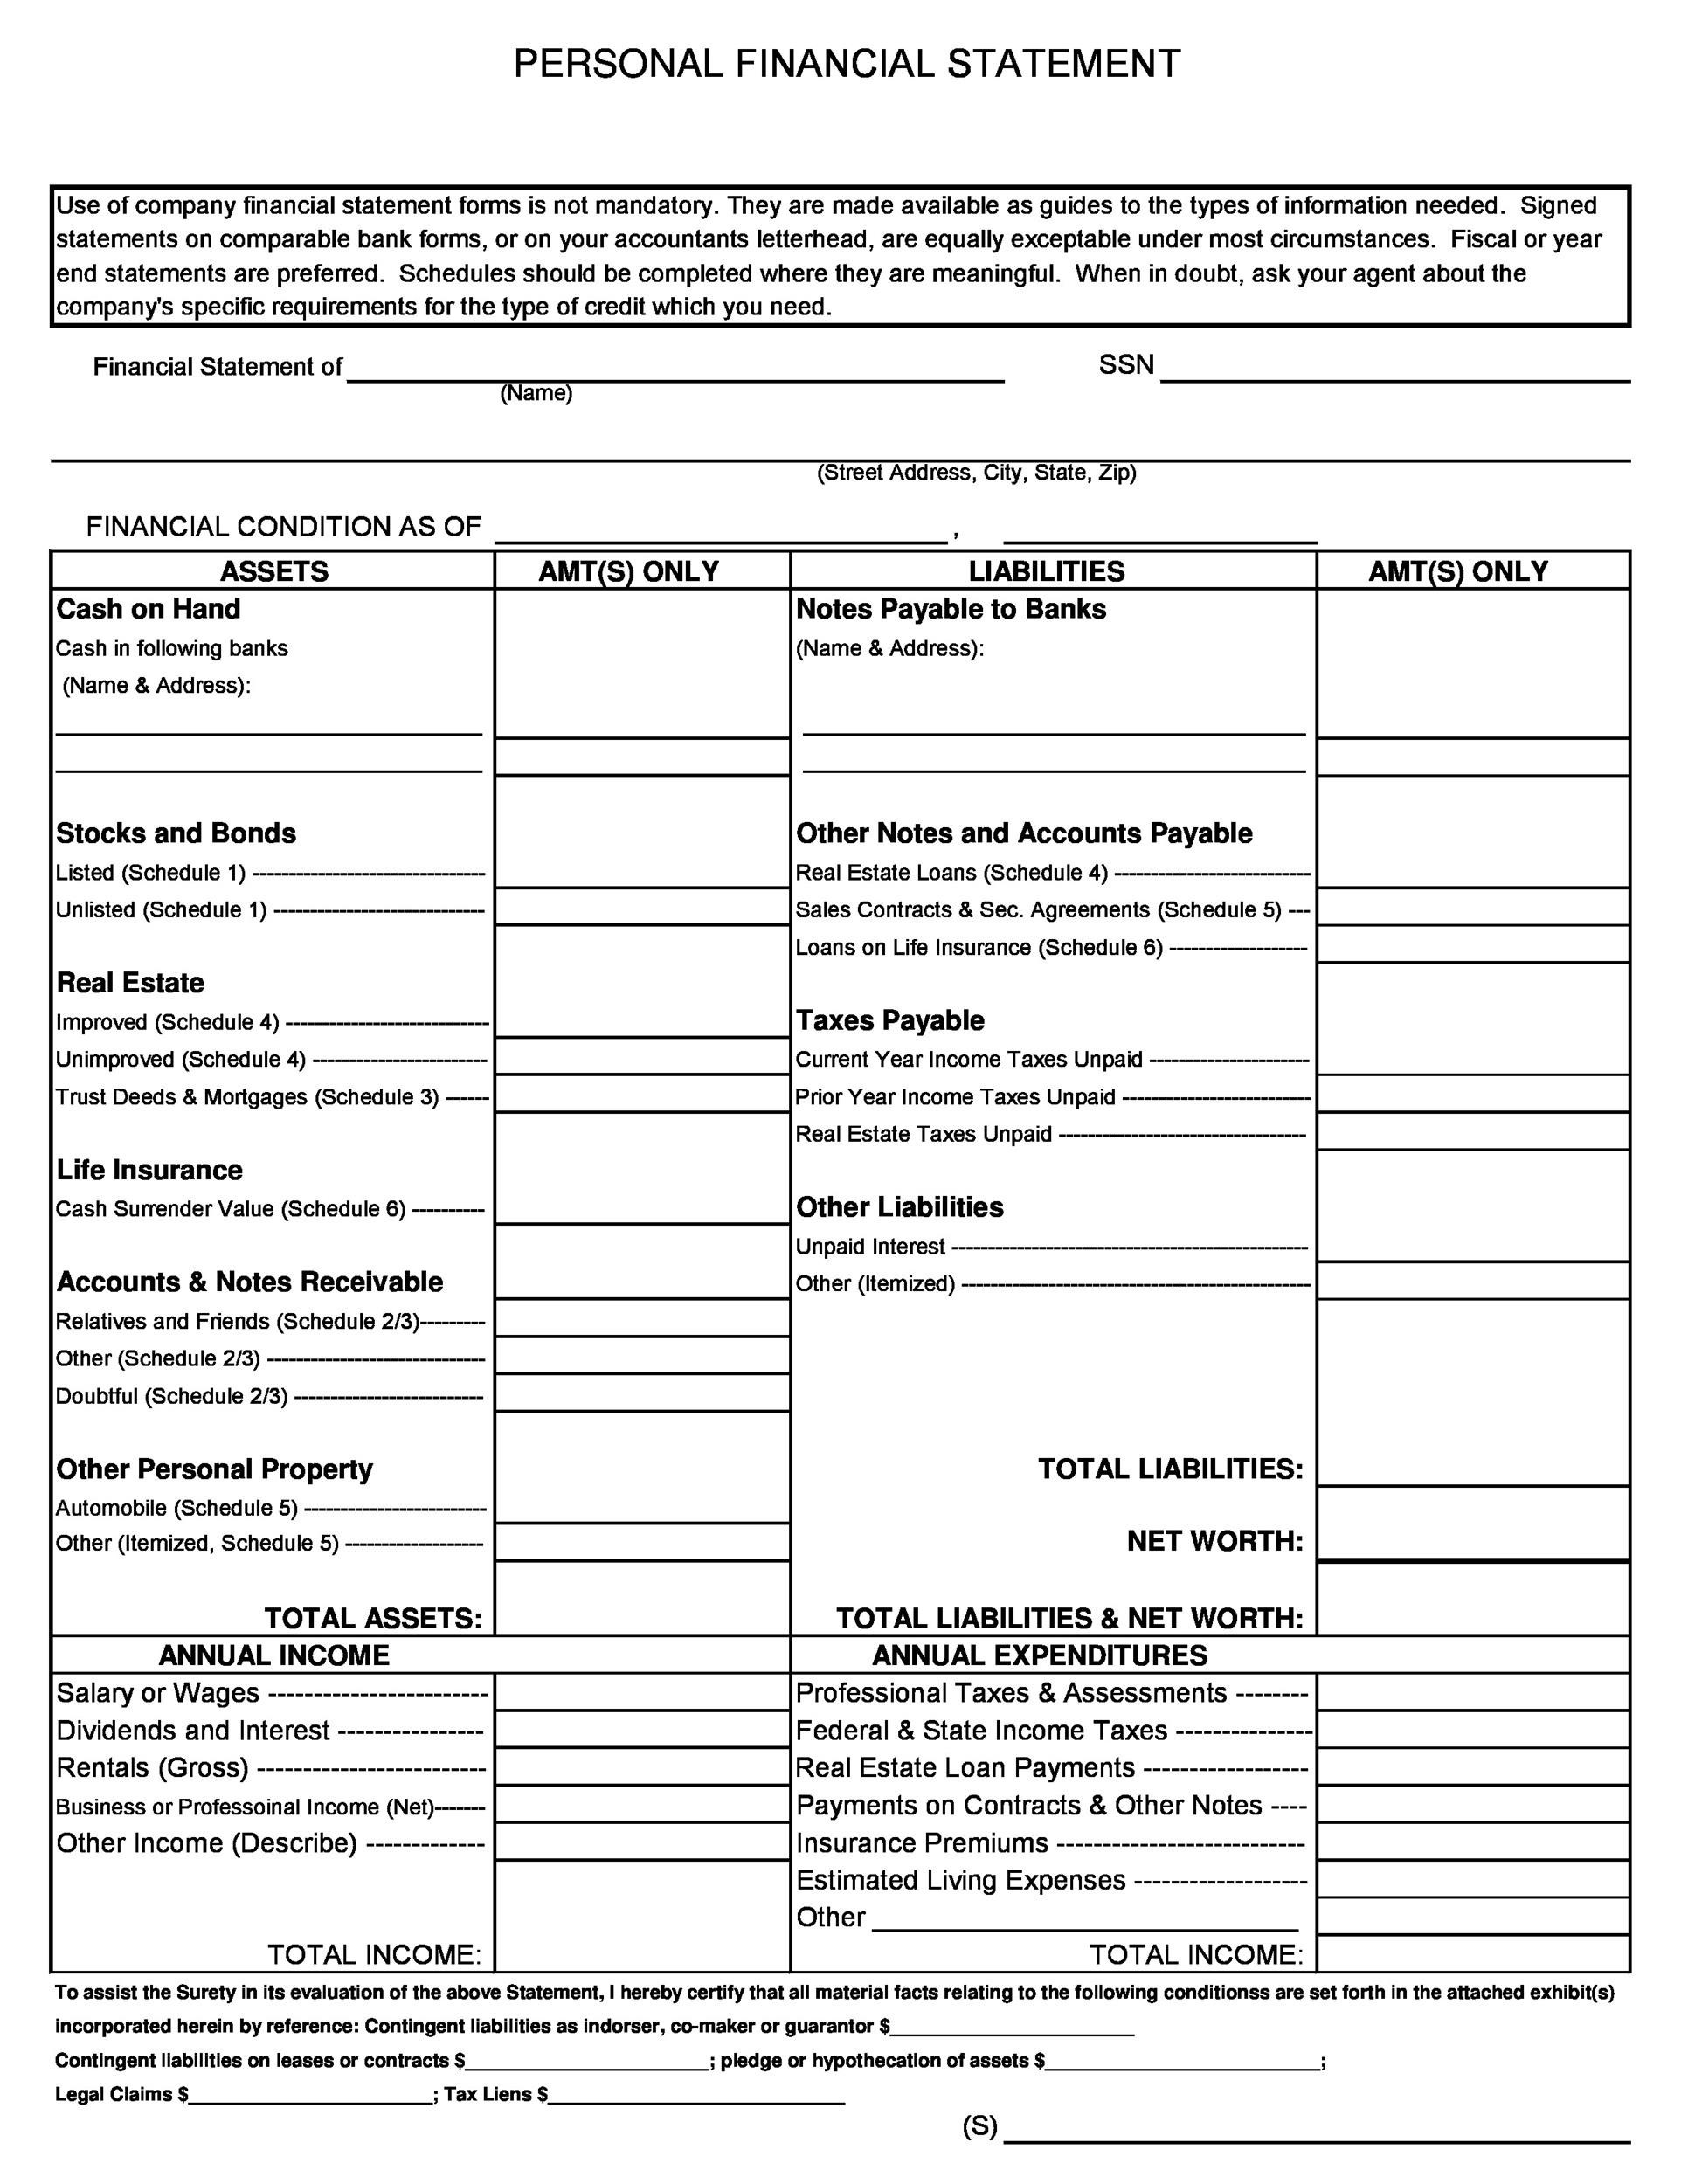 Free Personal Financial Statement Template 35